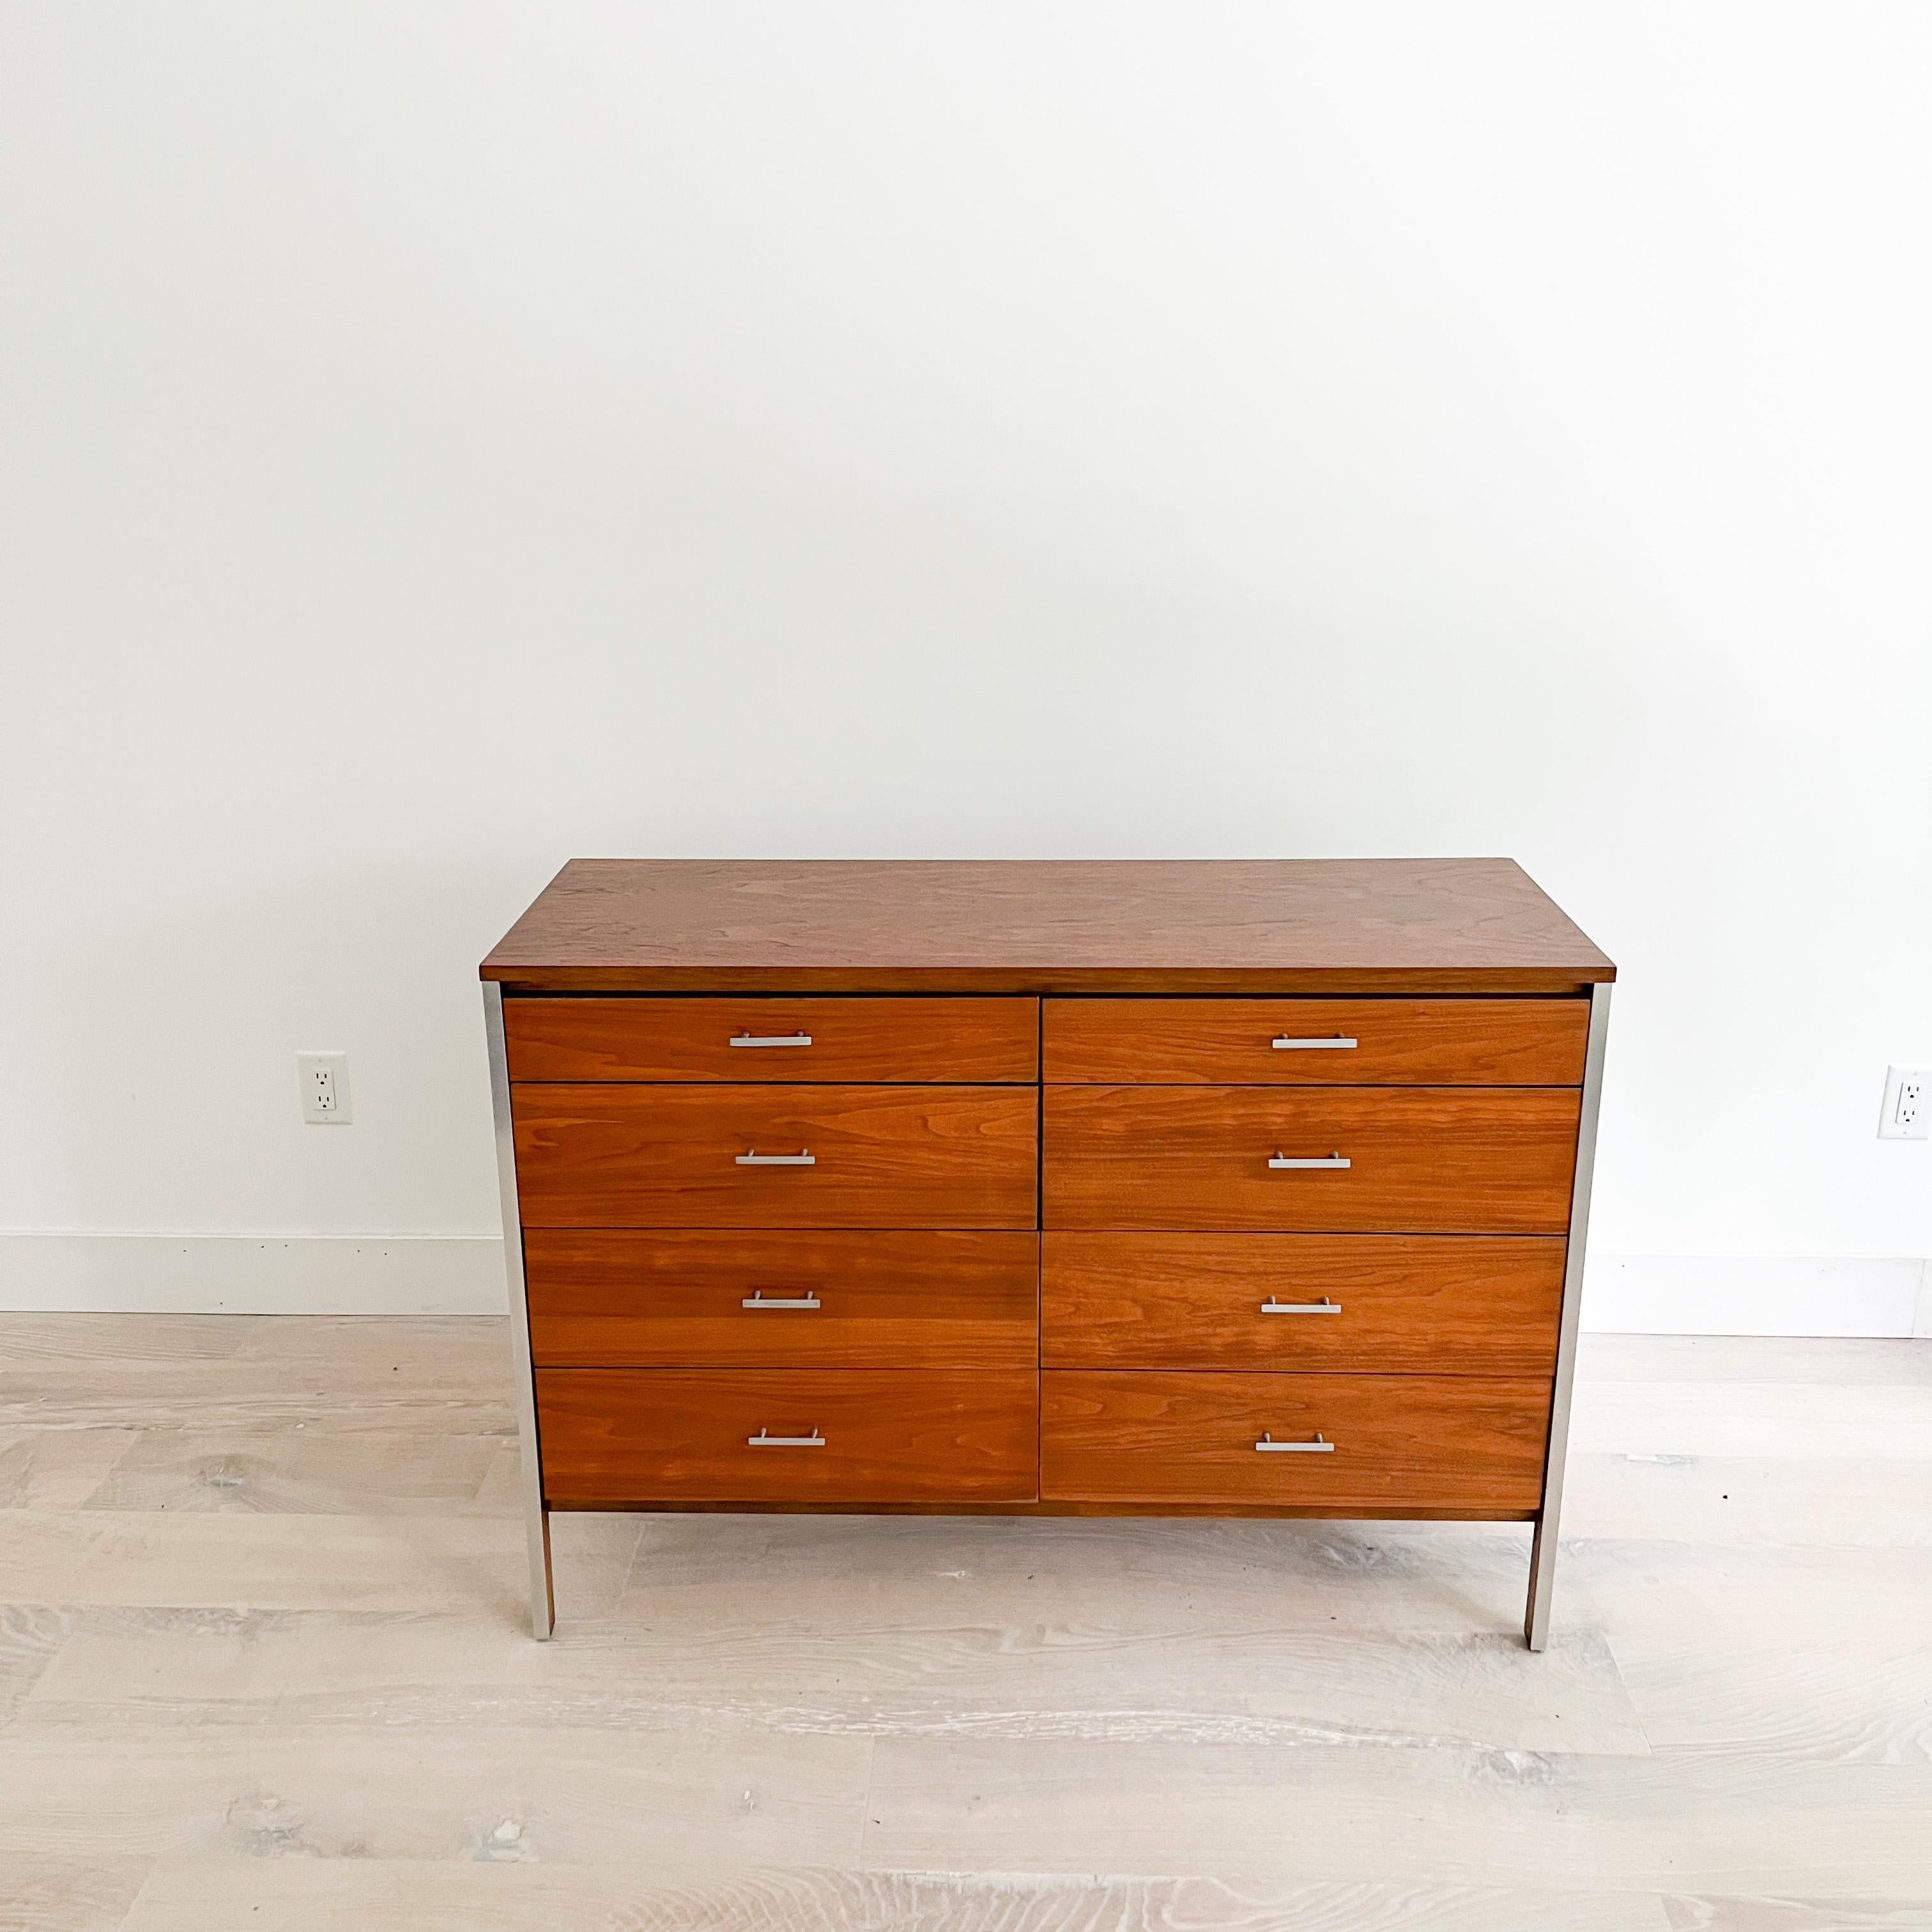 Mid-Century Modern 8 drawer walnut dresser with aluminum accents designed by Paul McCobb for Calvin. The top and drawer fronts have been sanded and restored. Some light scuffing/scratching/small areas of veneer repair from age appropriate wear.